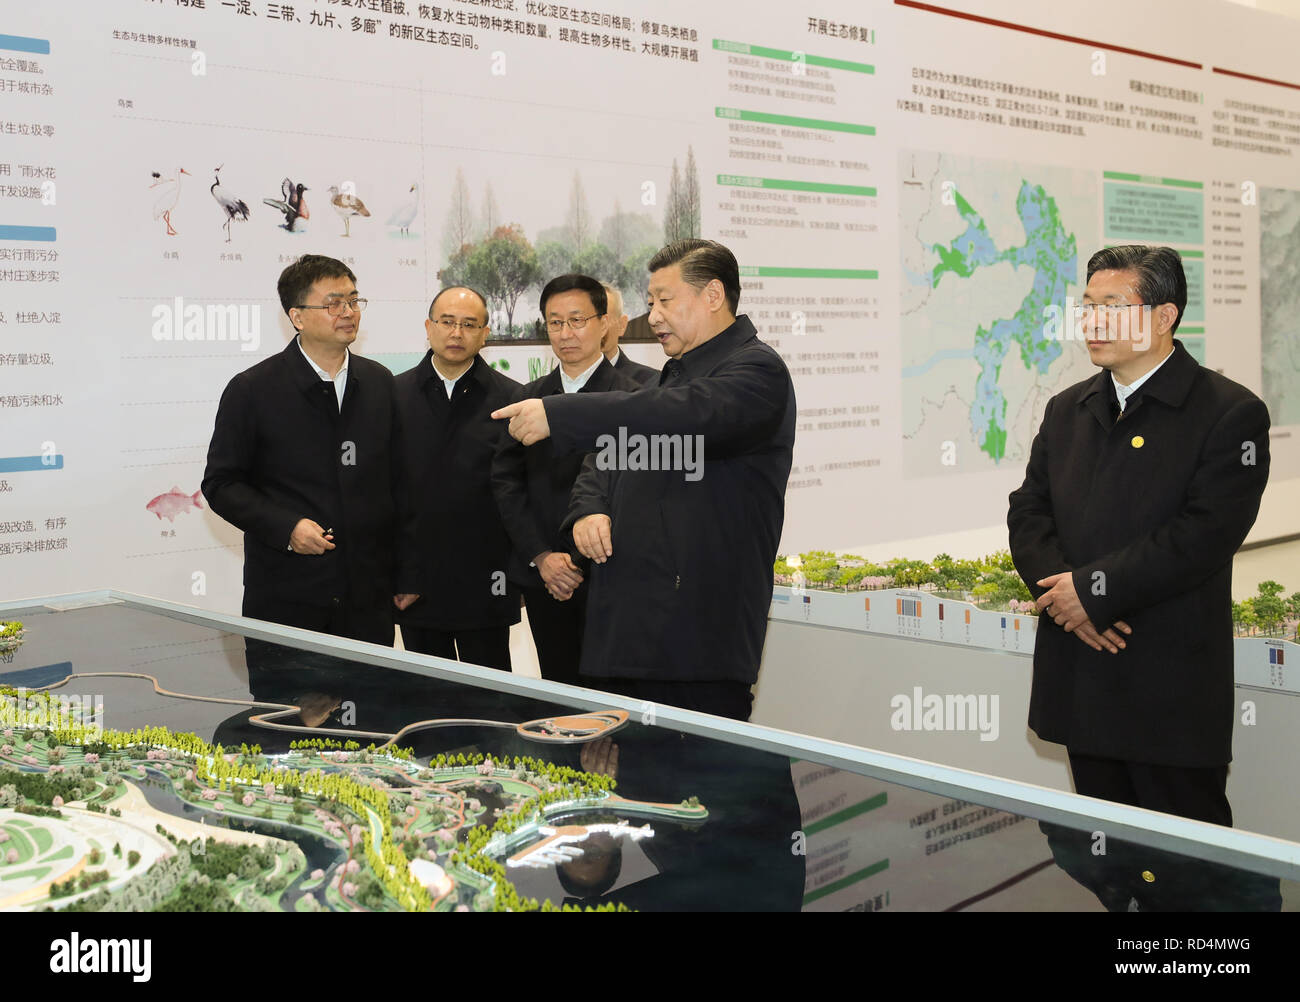 Xiongan New Area, China's Hebei Province. 16th Jan, 2019. Chinese President Xi Jinping, also general secretary of the Communist Party of China (CPC) Central Committee and chairman of the Central Military Commission, listens to the introduction of the general plan, policy system and construction of Xiongan New Area at the Xiongan planning exhibition center during his inspection in Xiongan New Area, north China's Hebei Province, Jan. 16, 2019. Credit: Ju Peng/Xinhua/Alamy Live News Stock Photo